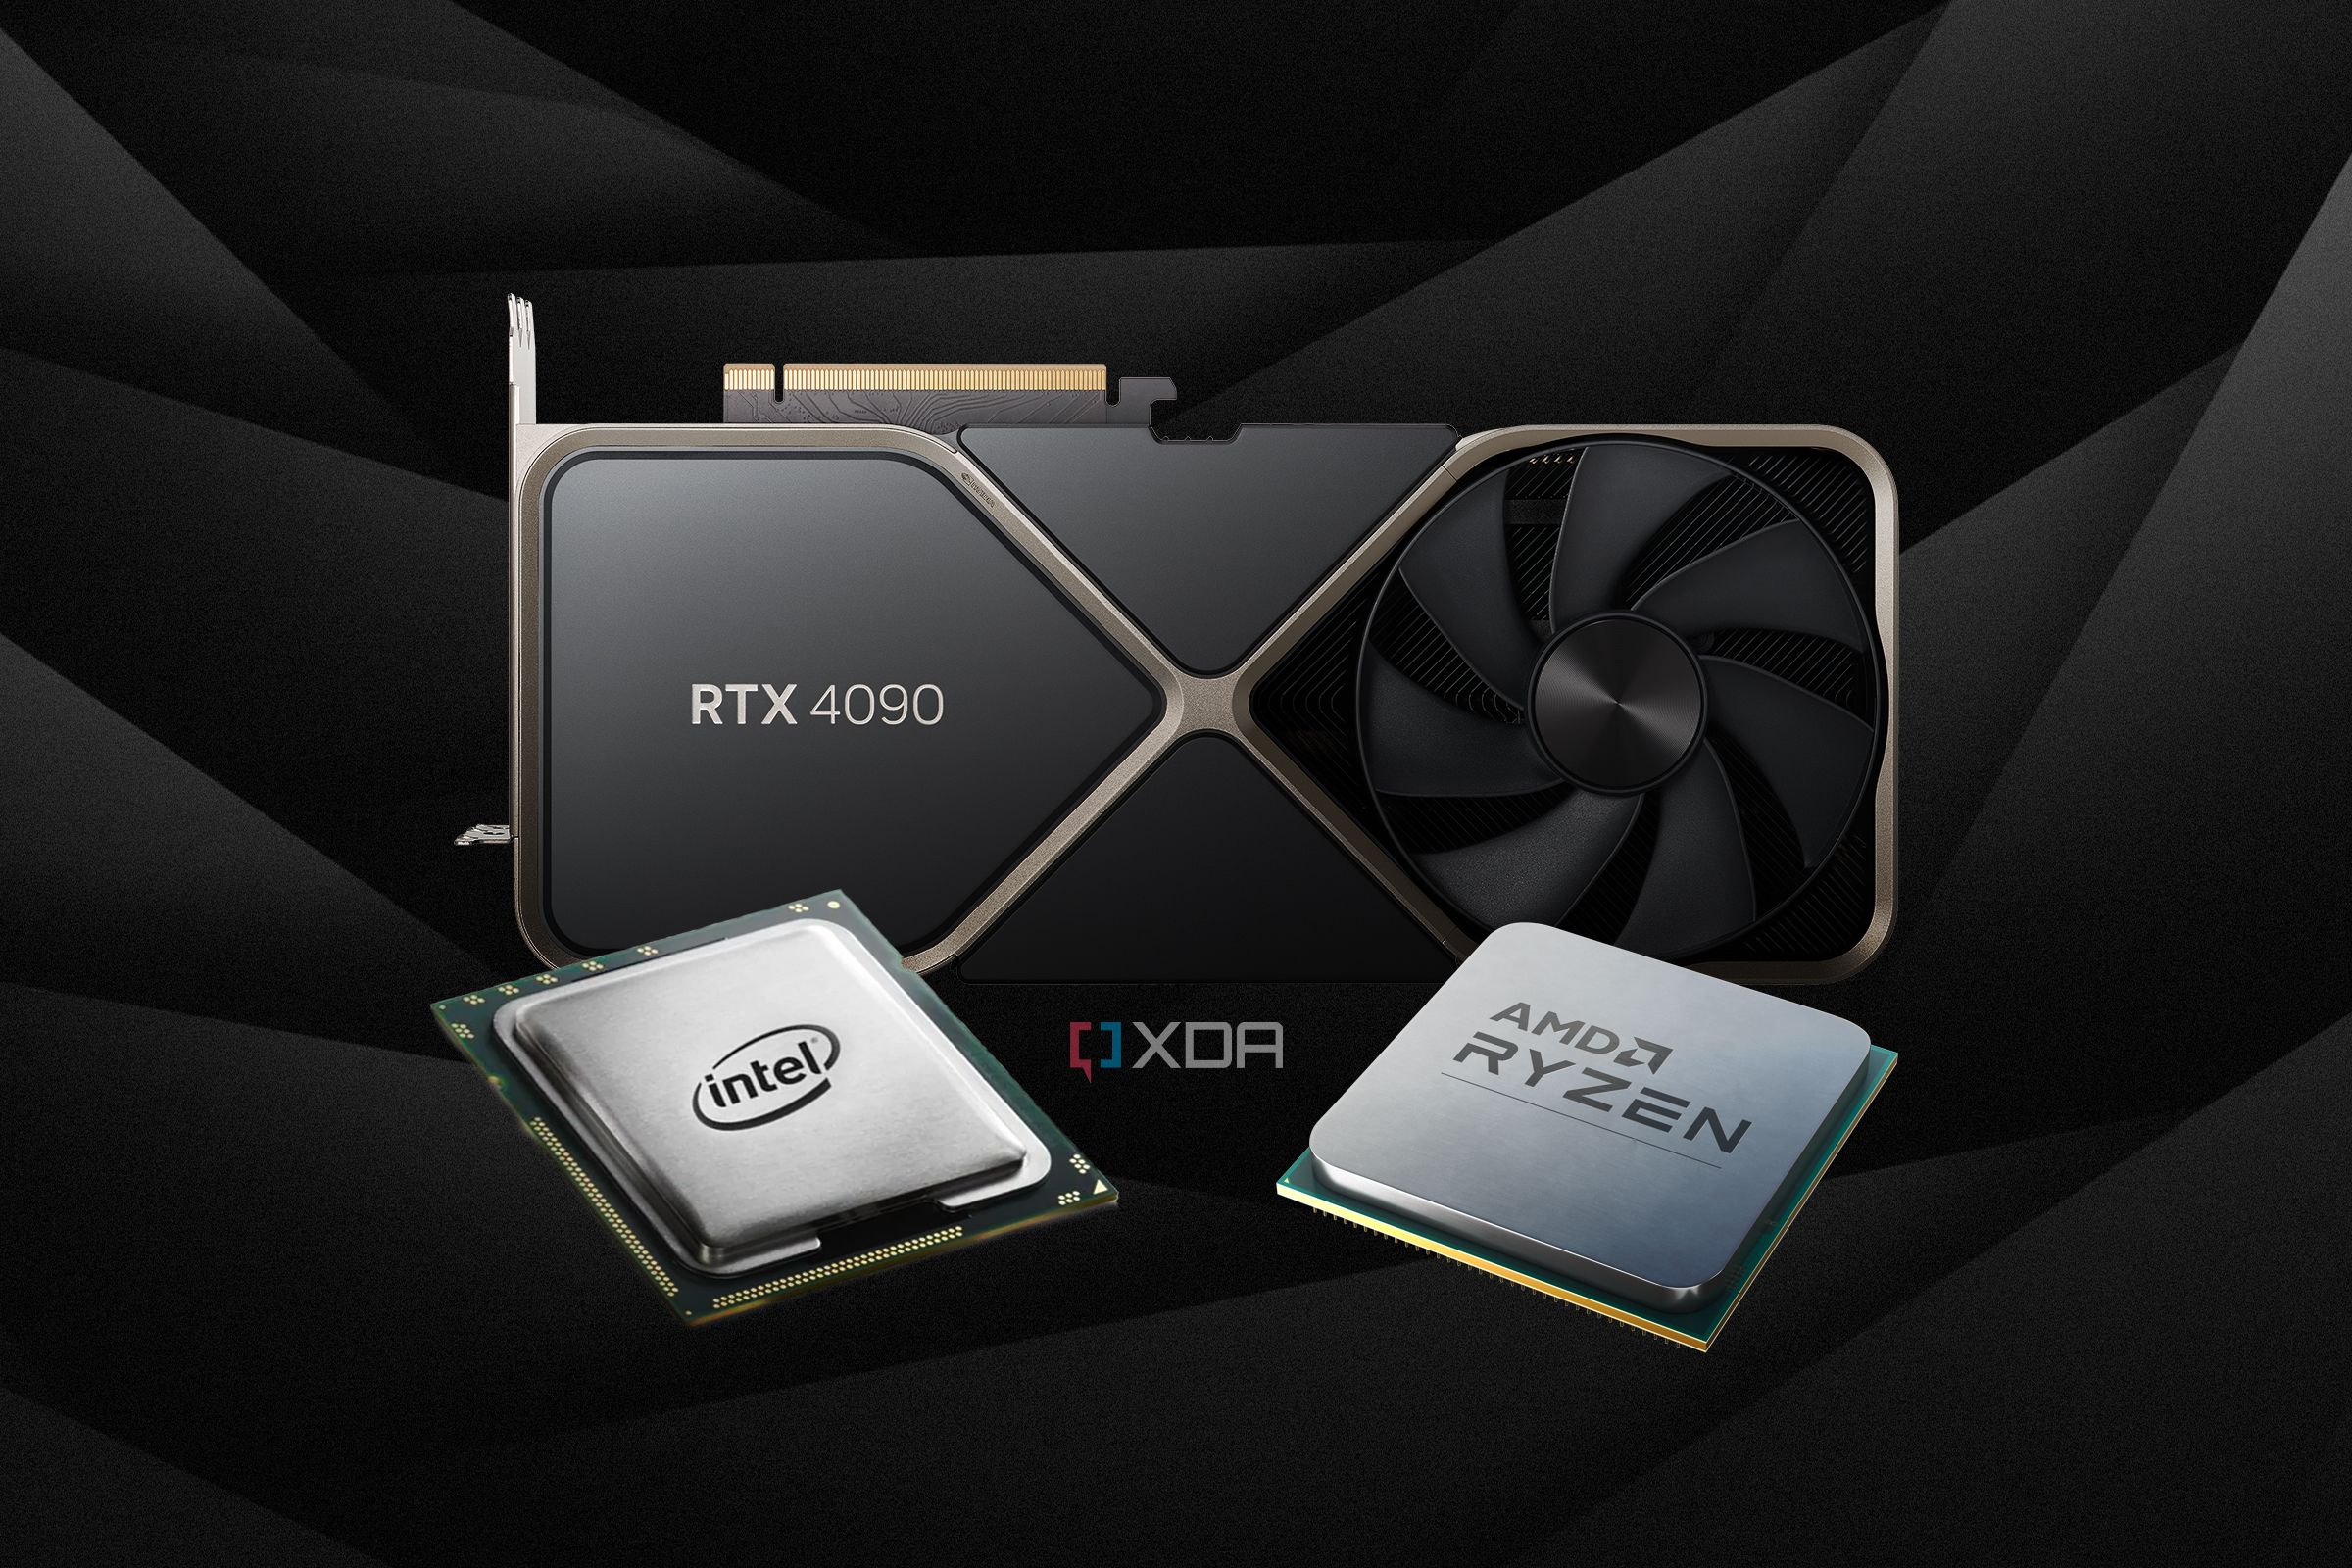 The NVIDIA RTX 4090 is Amazing, and Photographers Should NOT Buy